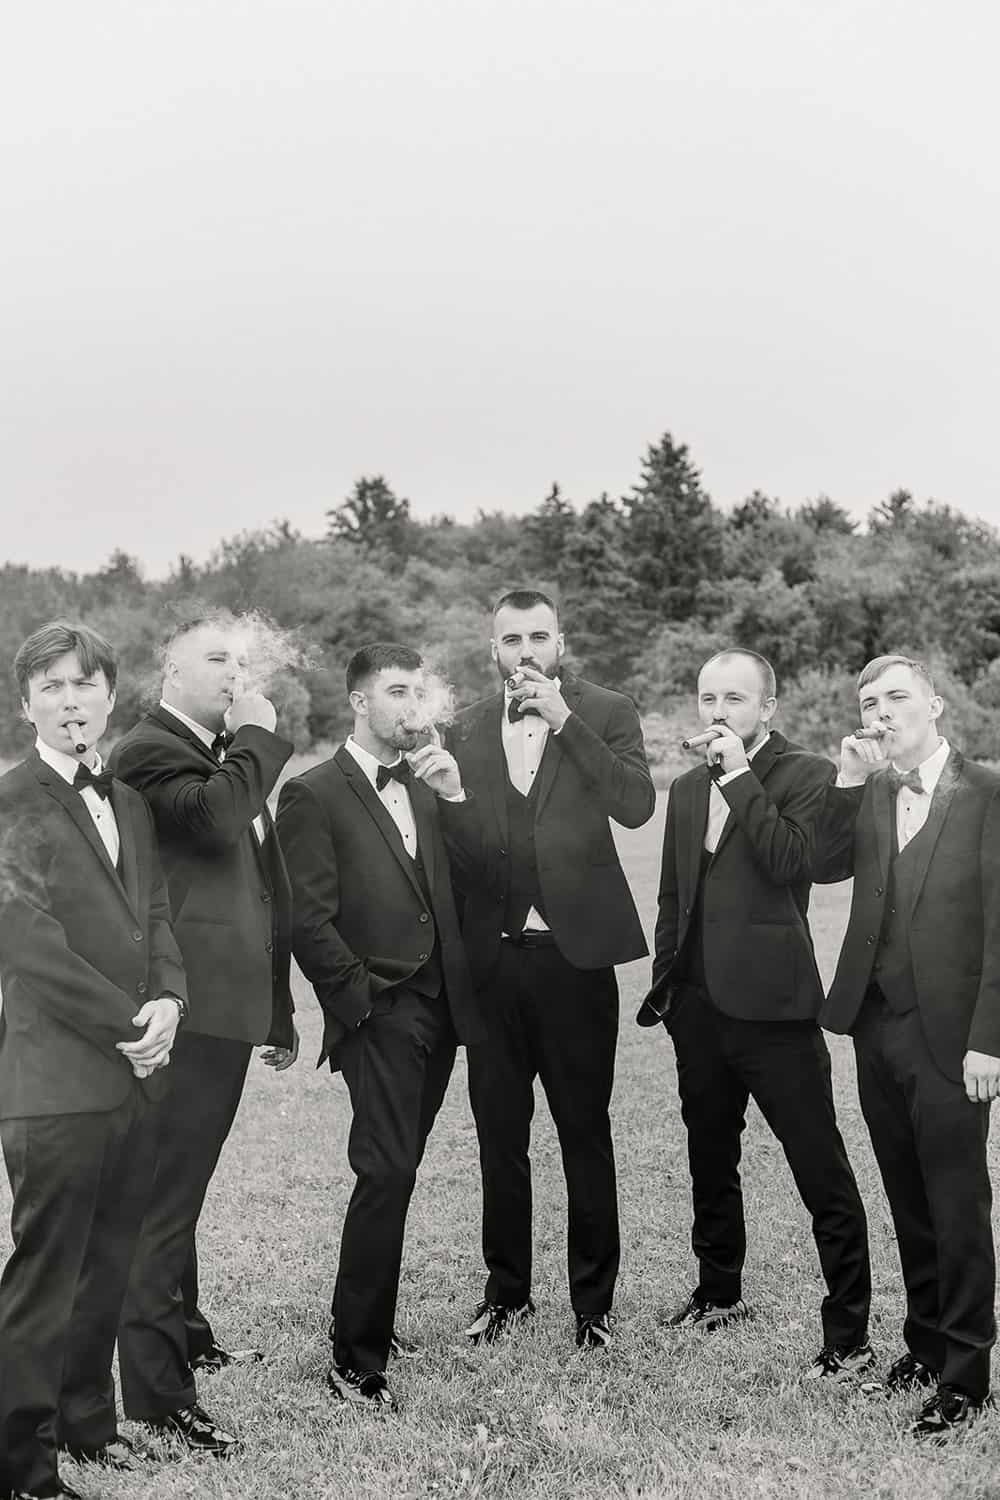 A group of six men in tuxedos, standing outdoors, each holding a cigar, with a natural backdrop.